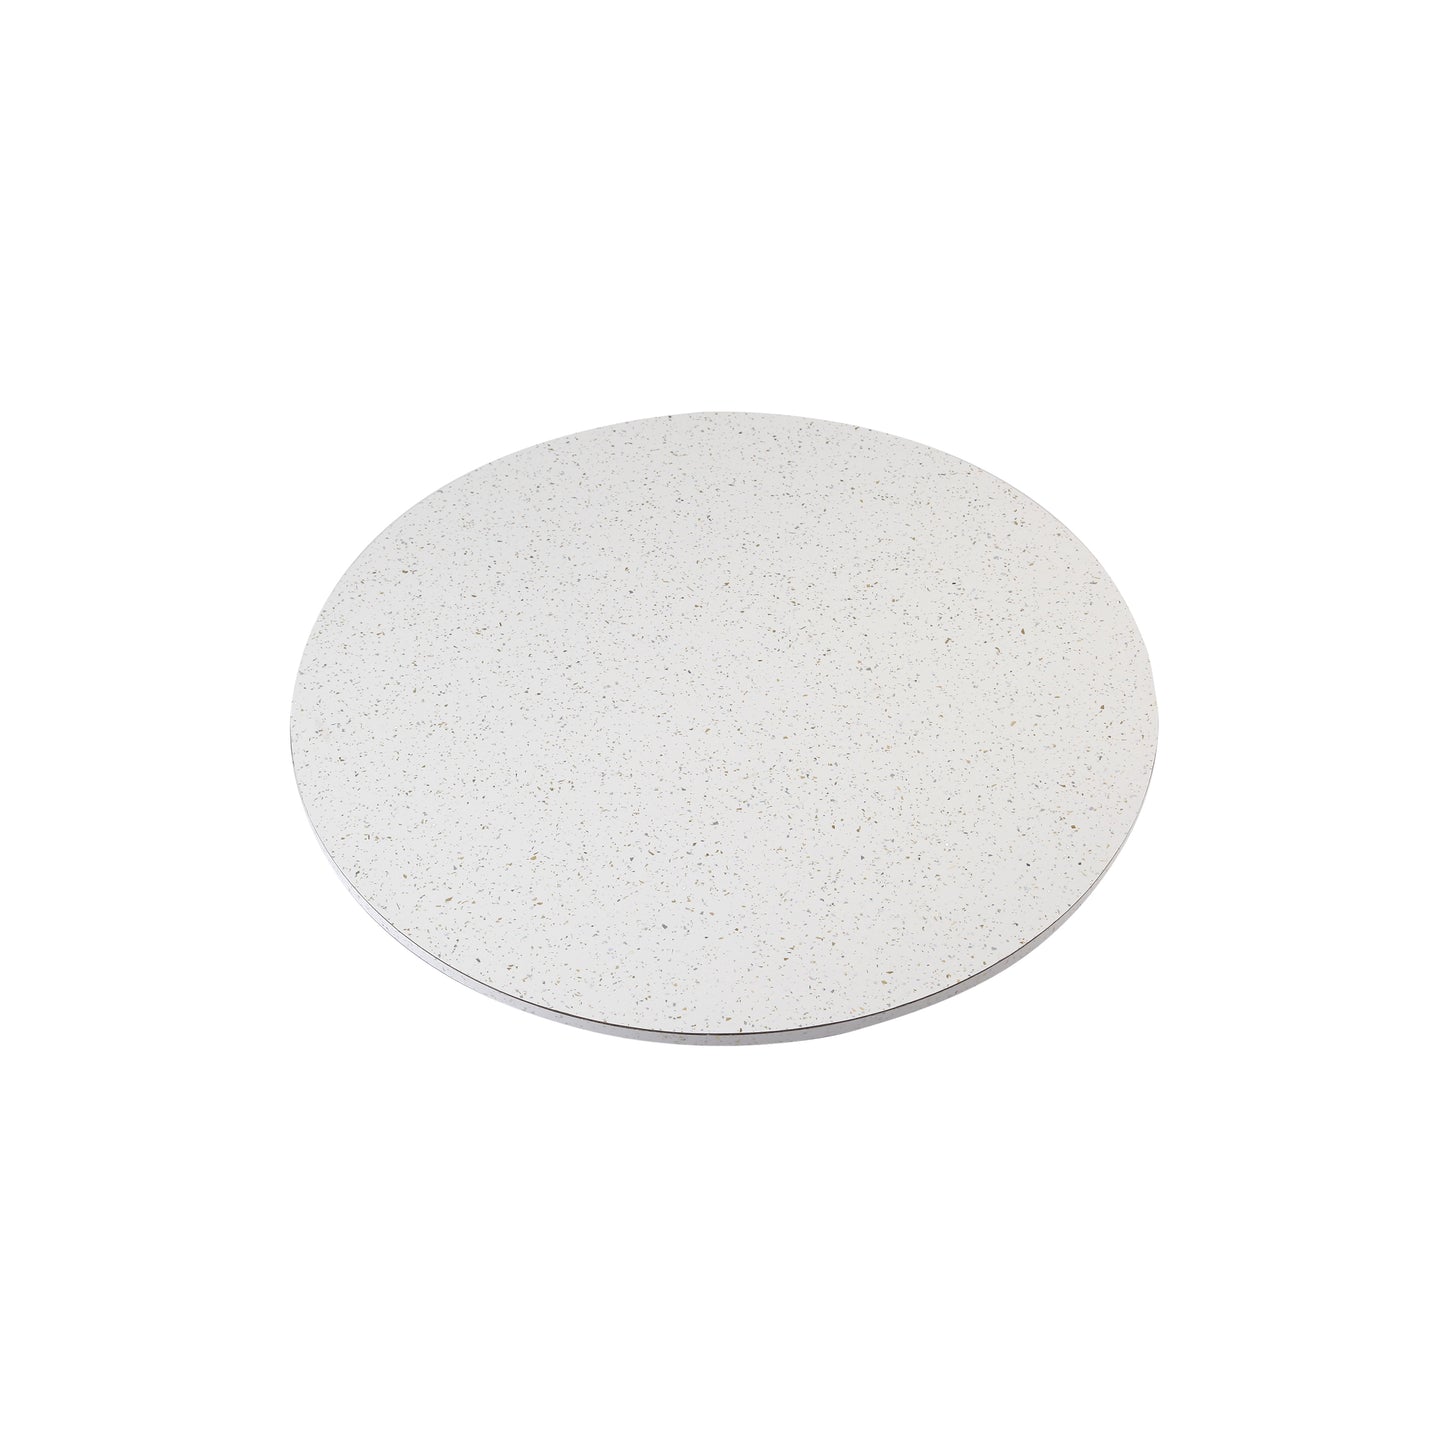 A Tiny Mistake White Granite Wooden Table Turner, Dining Table Organisation, Lazy Susan for Dining Room Decor